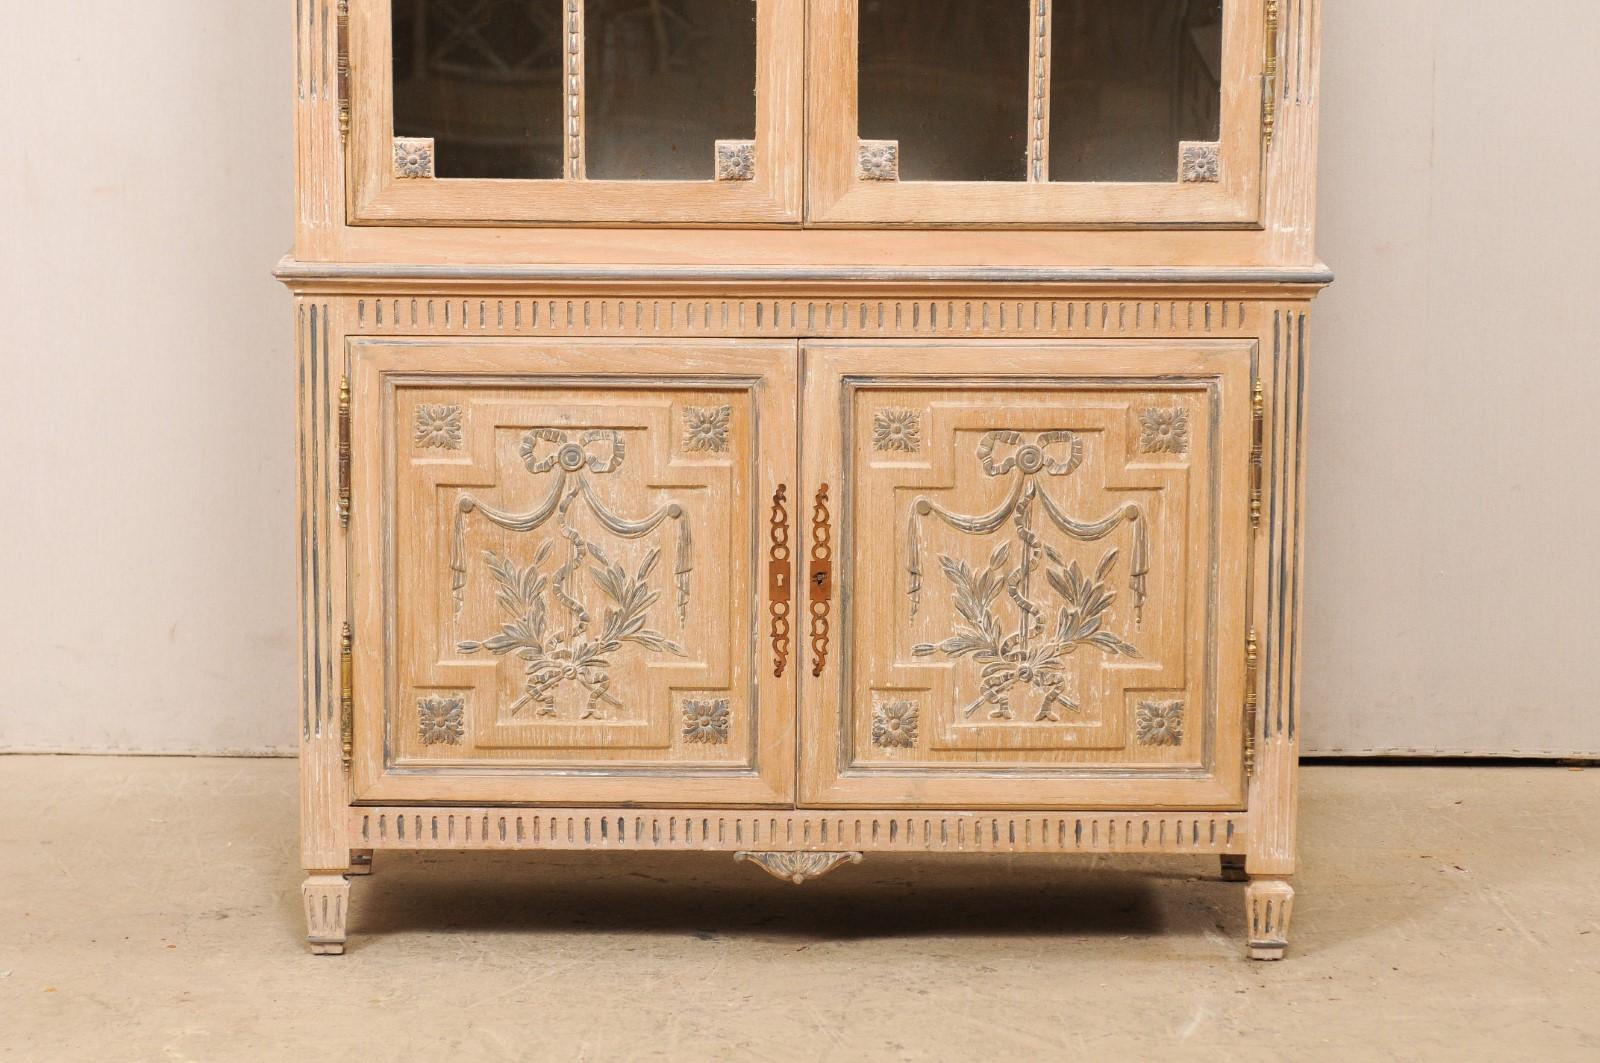 Wood French 7.25 Ft Tall Buffet à Deux-Corps w/ Nice Trim & Neoclassical Influences